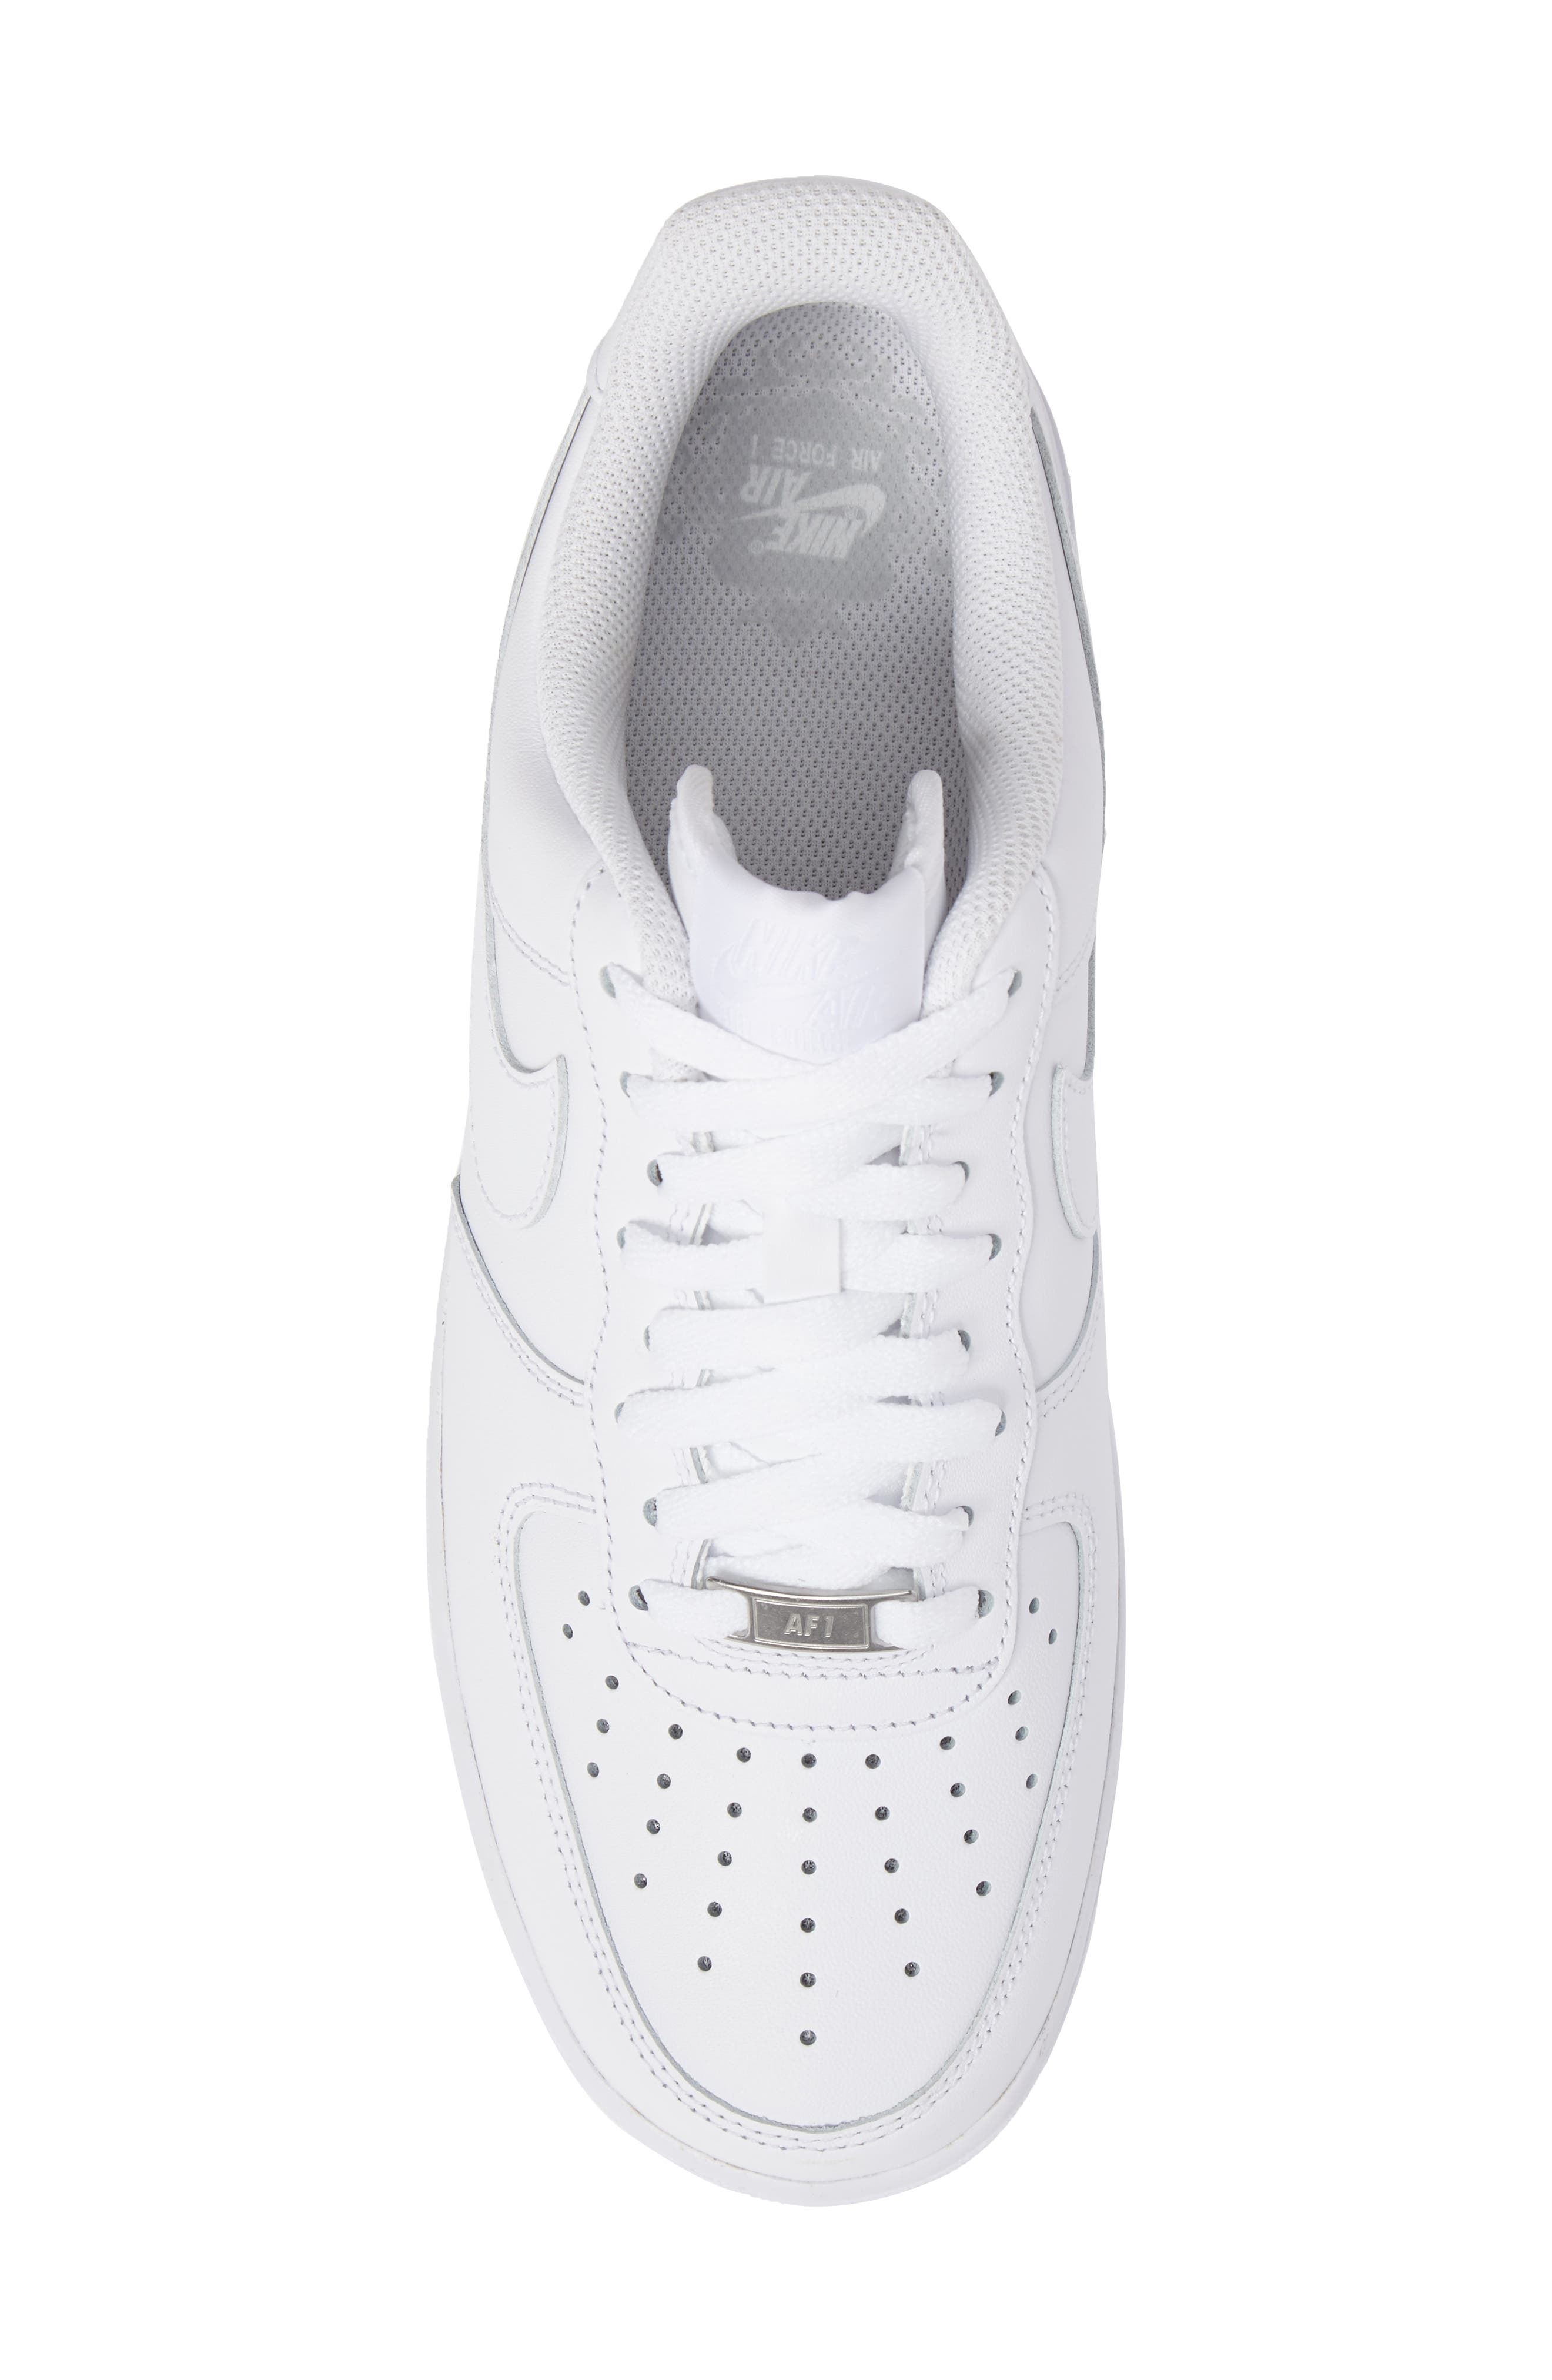 Nike Men's Air Force 1 Low Casual Shoes (Limited Sizes Available) in White/White Size 18.0 | Leather